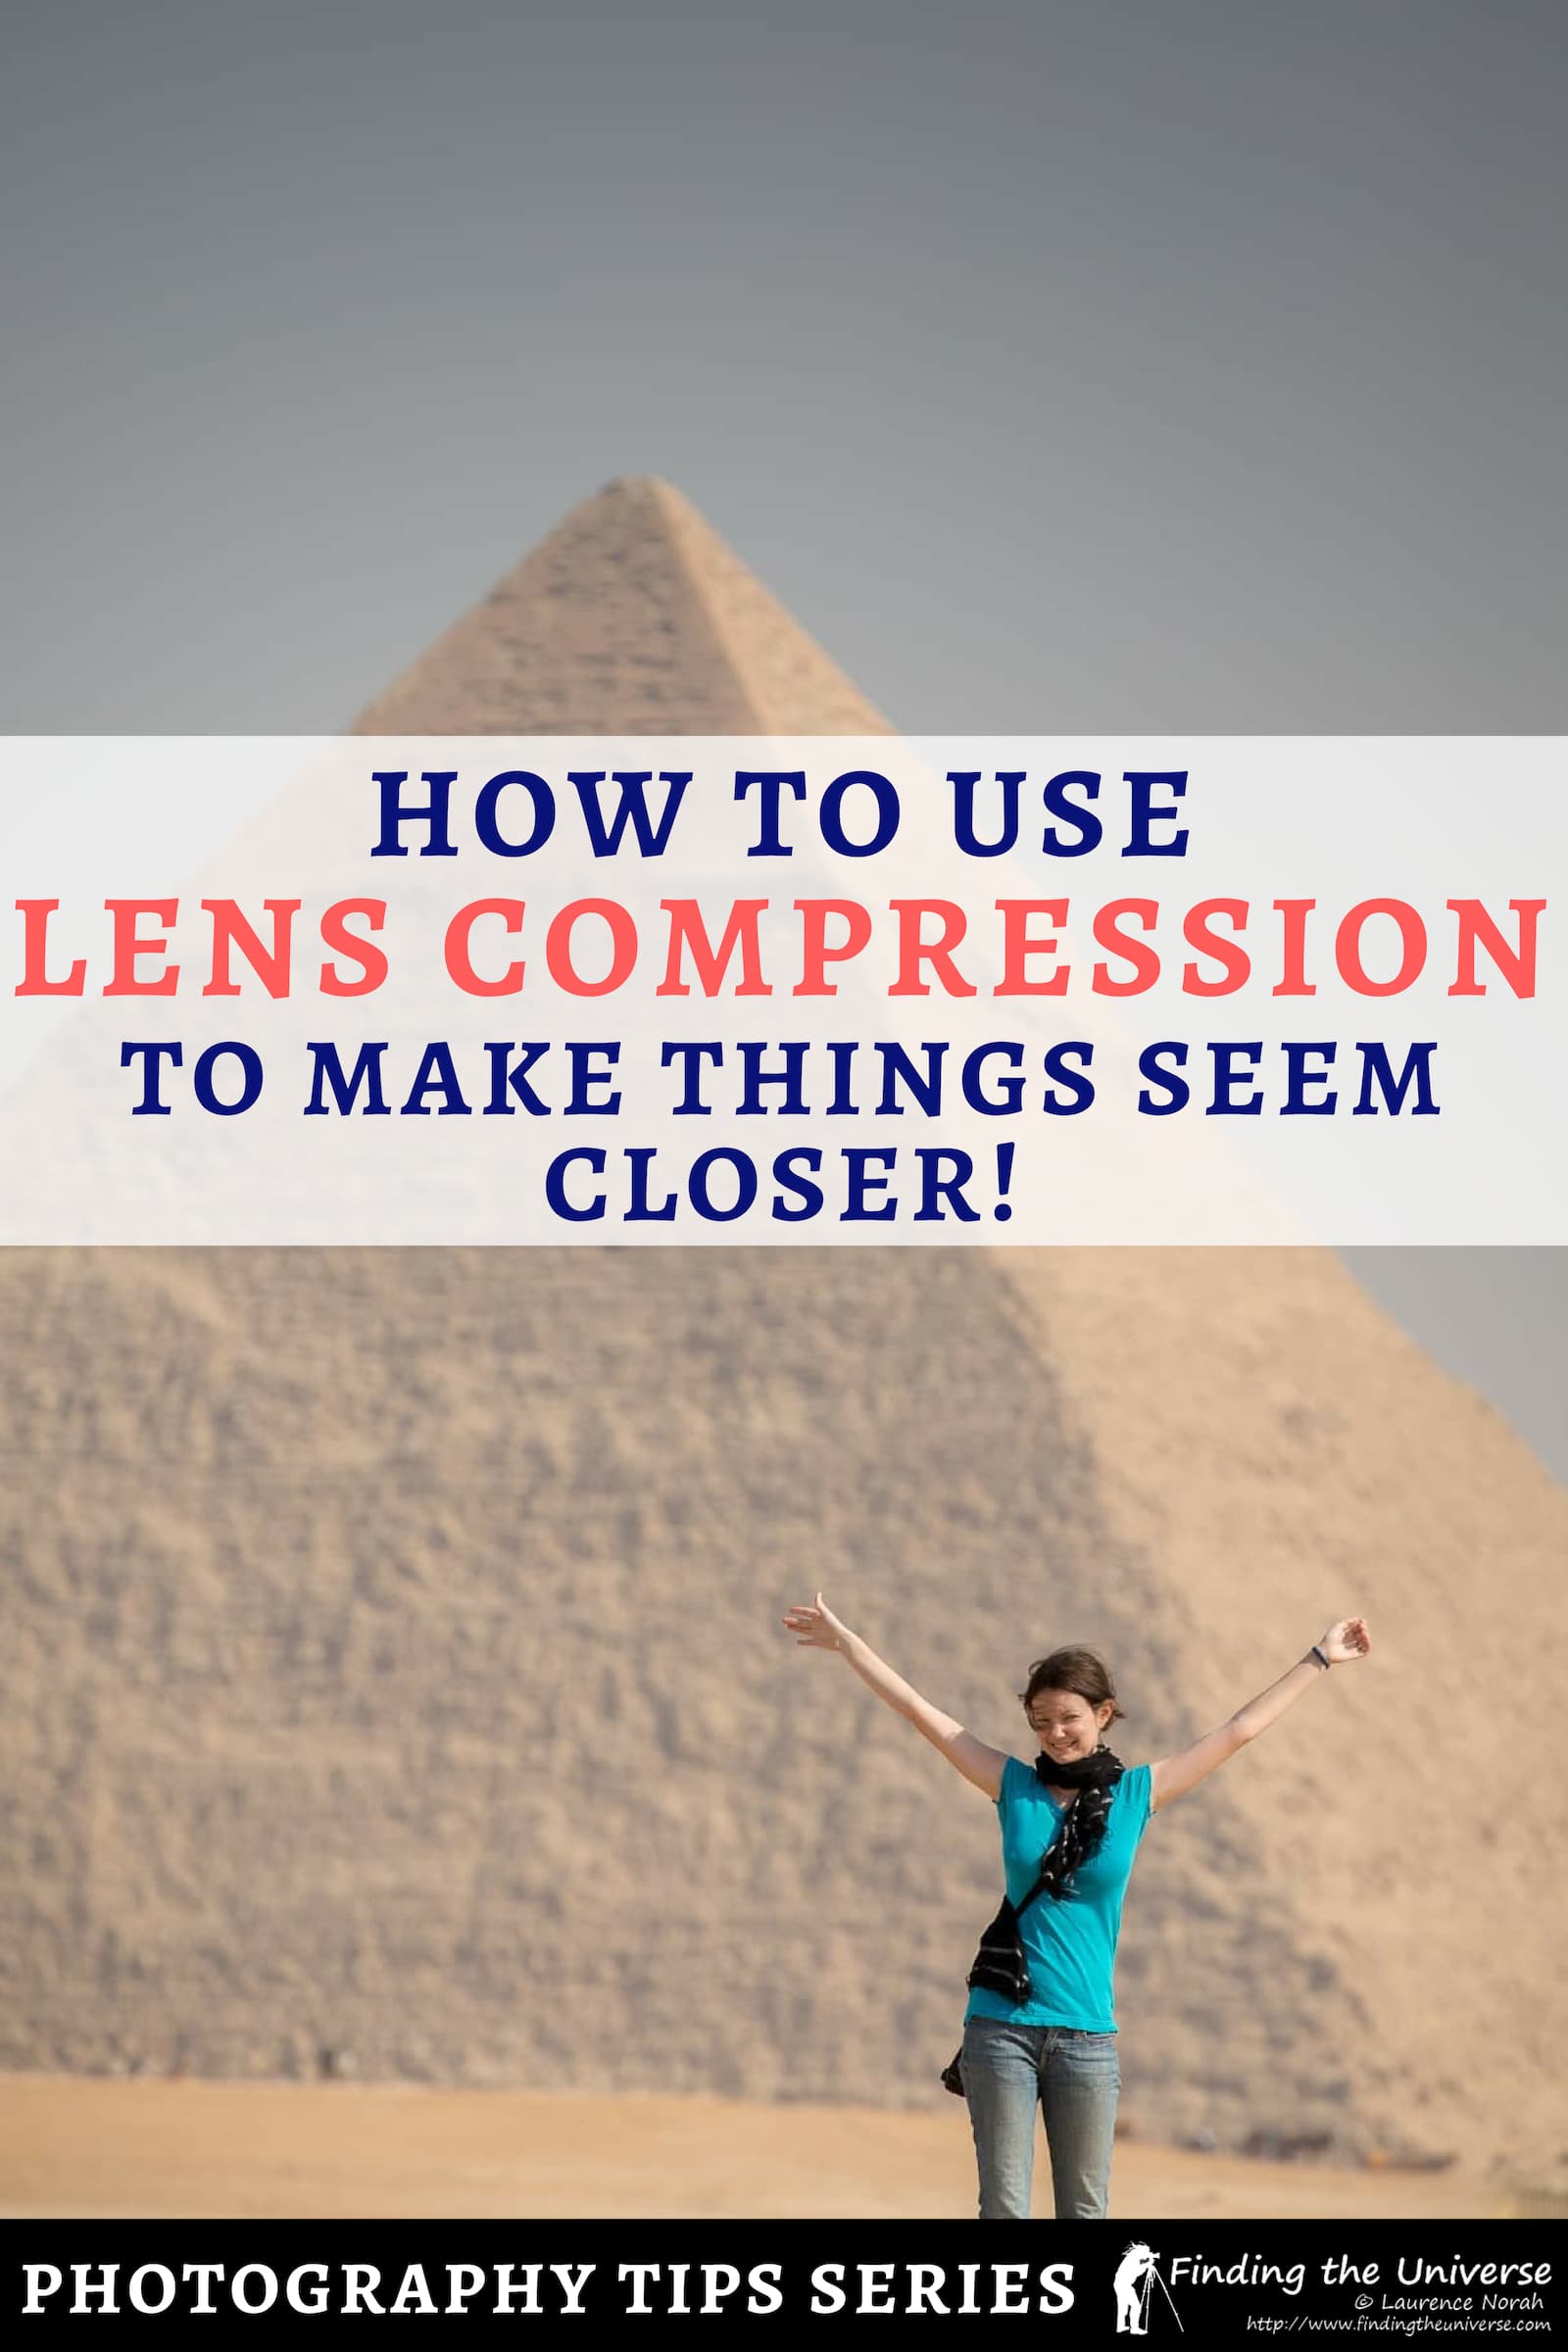 A guide to lens compression in photography - how to make subjects seem closer to their backgrounds than they really are! #photography #travel